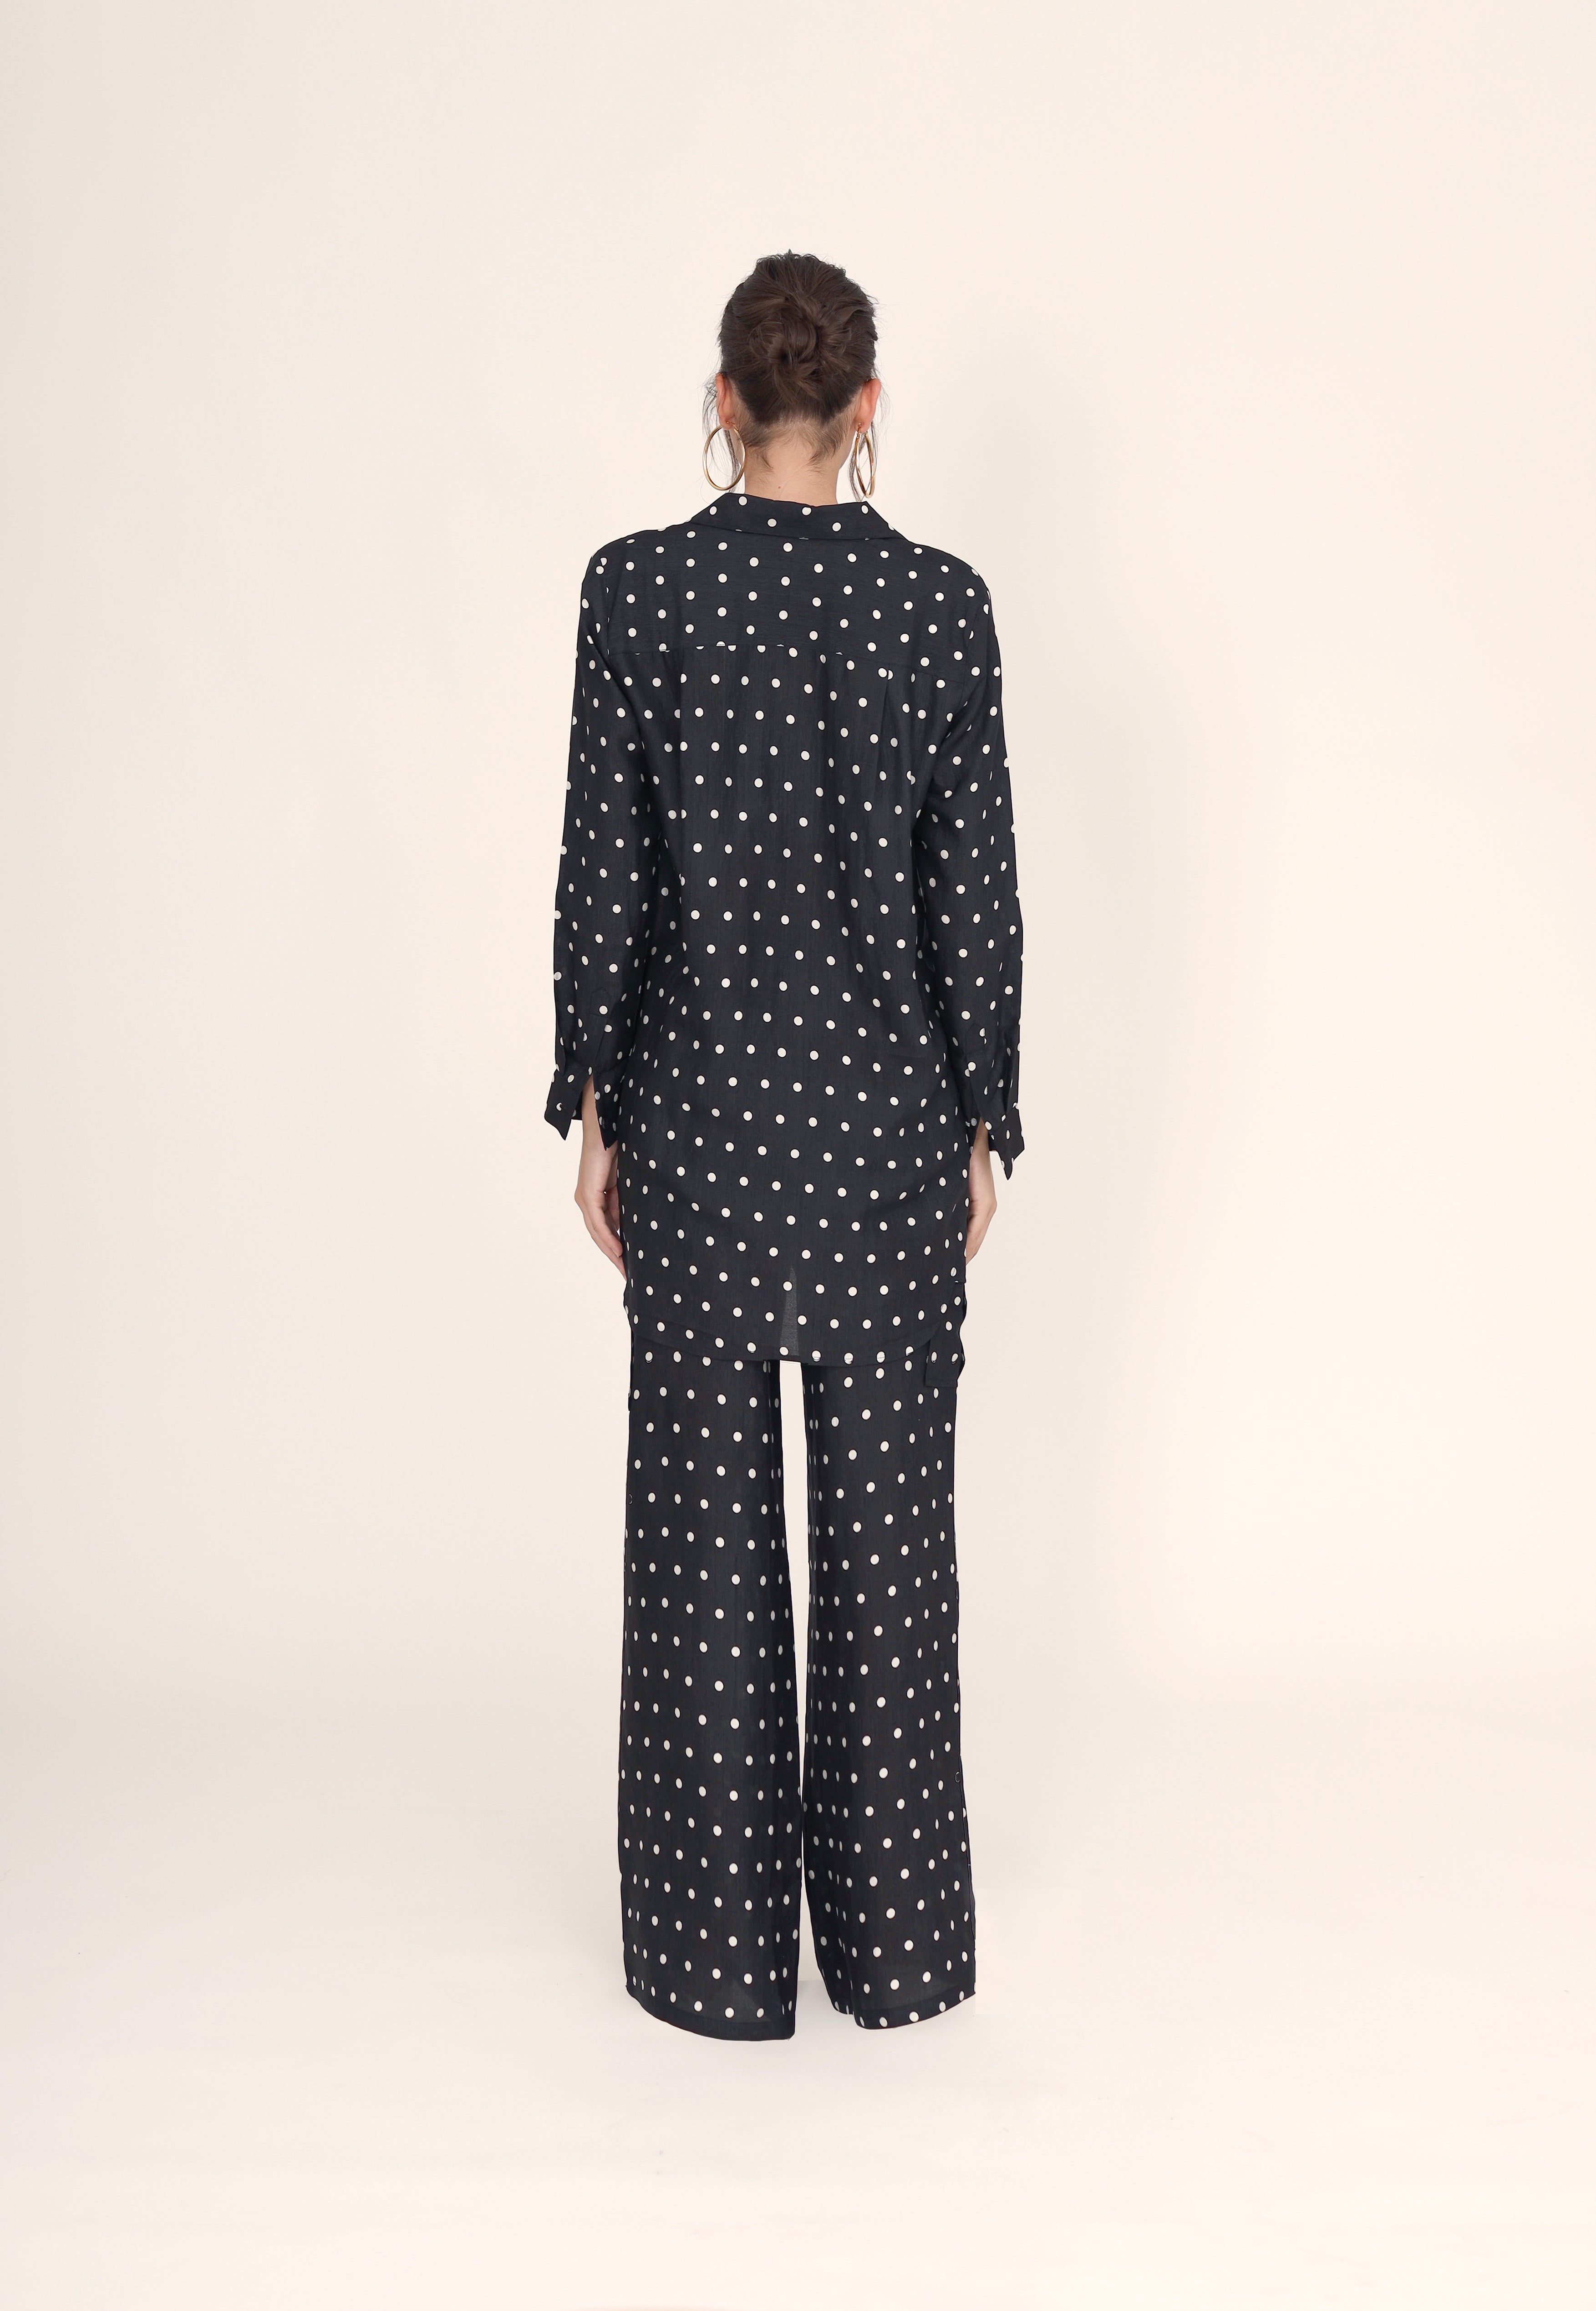 Timeless maxi shirt - Black and white dots